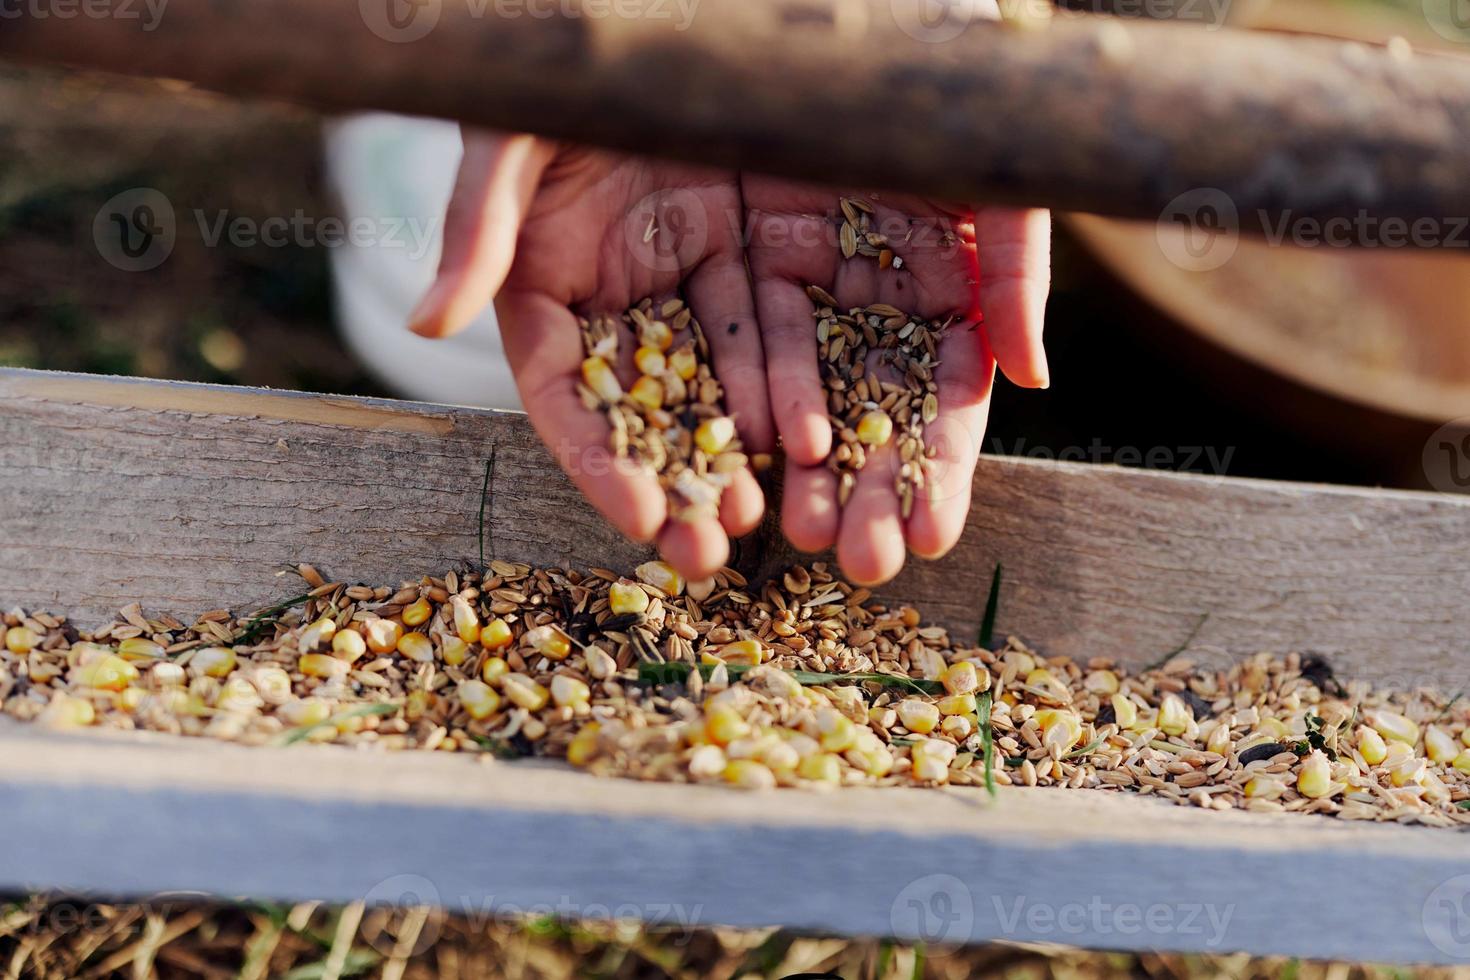 Women's hands close up putting grain, oats, and other good-for-natured organic feed into the bird feeder photo